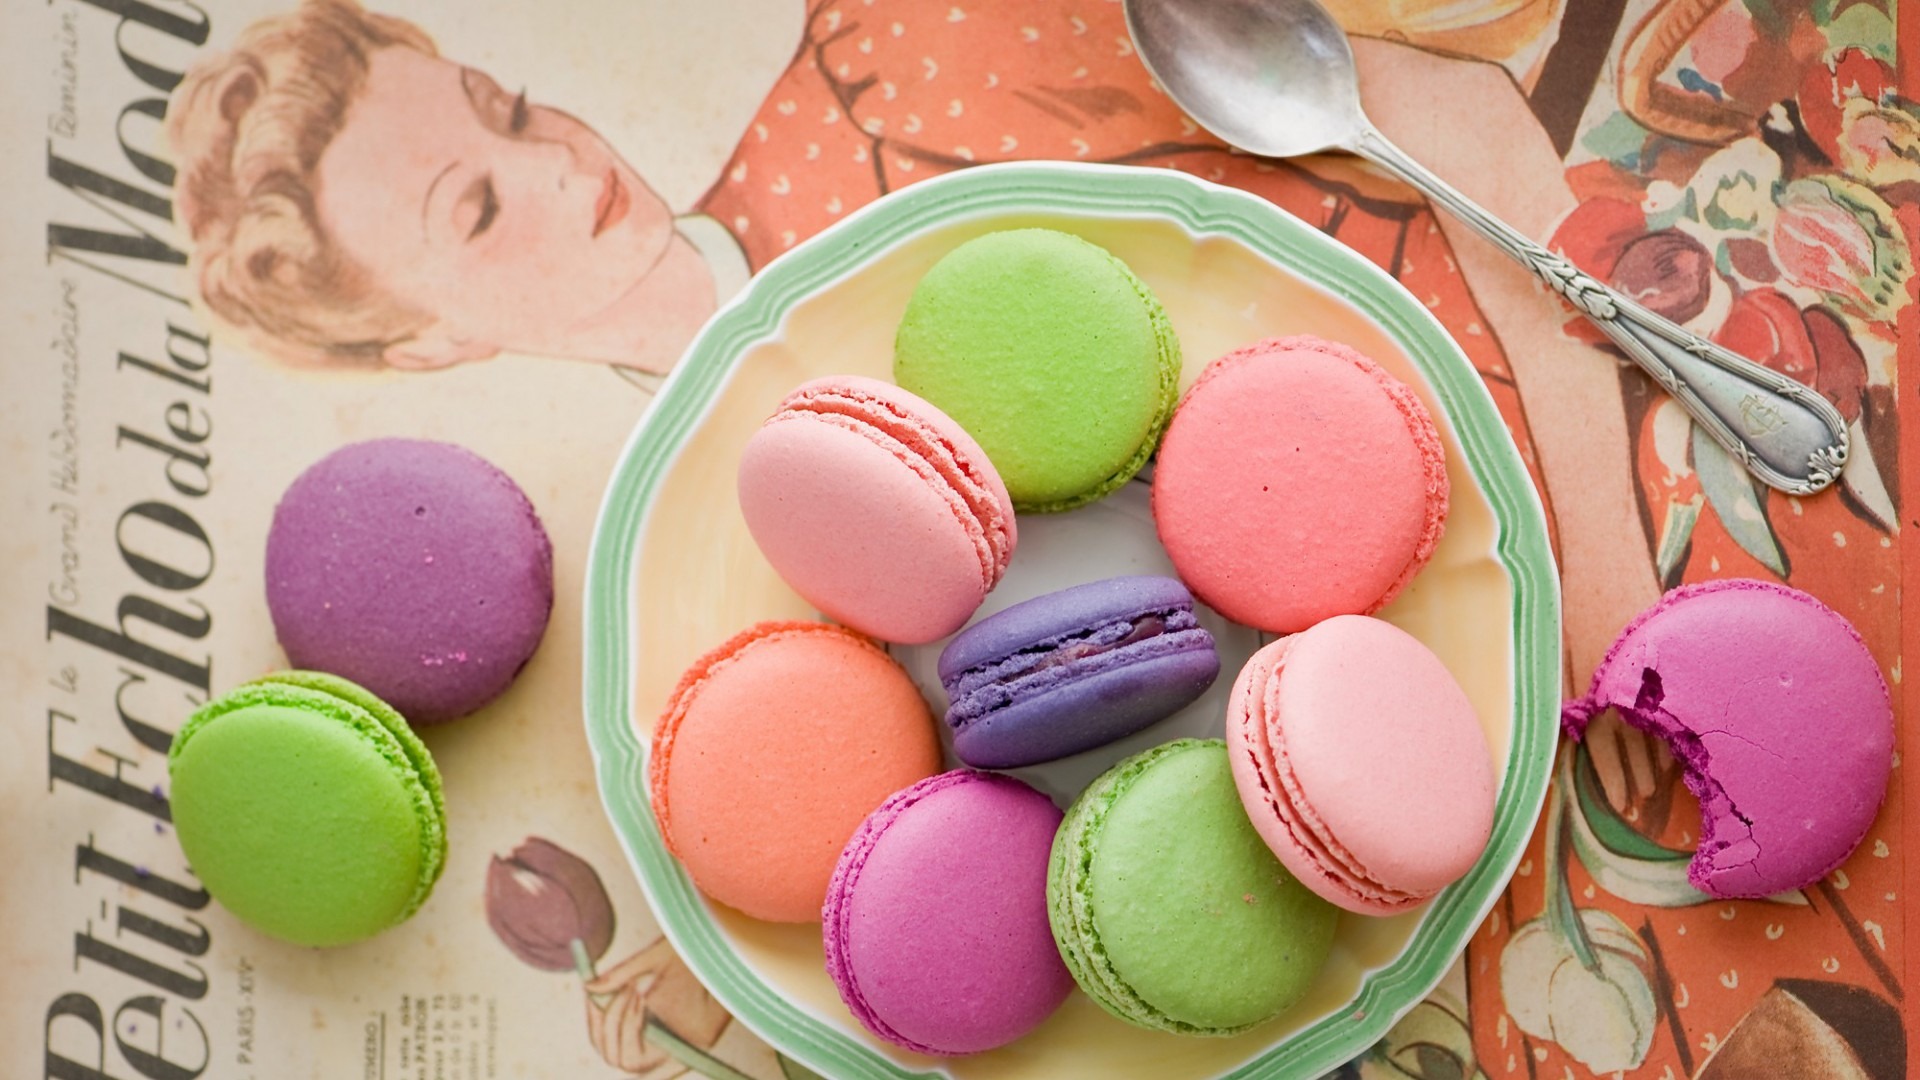 Macarons Wallpaper High Definition Quality